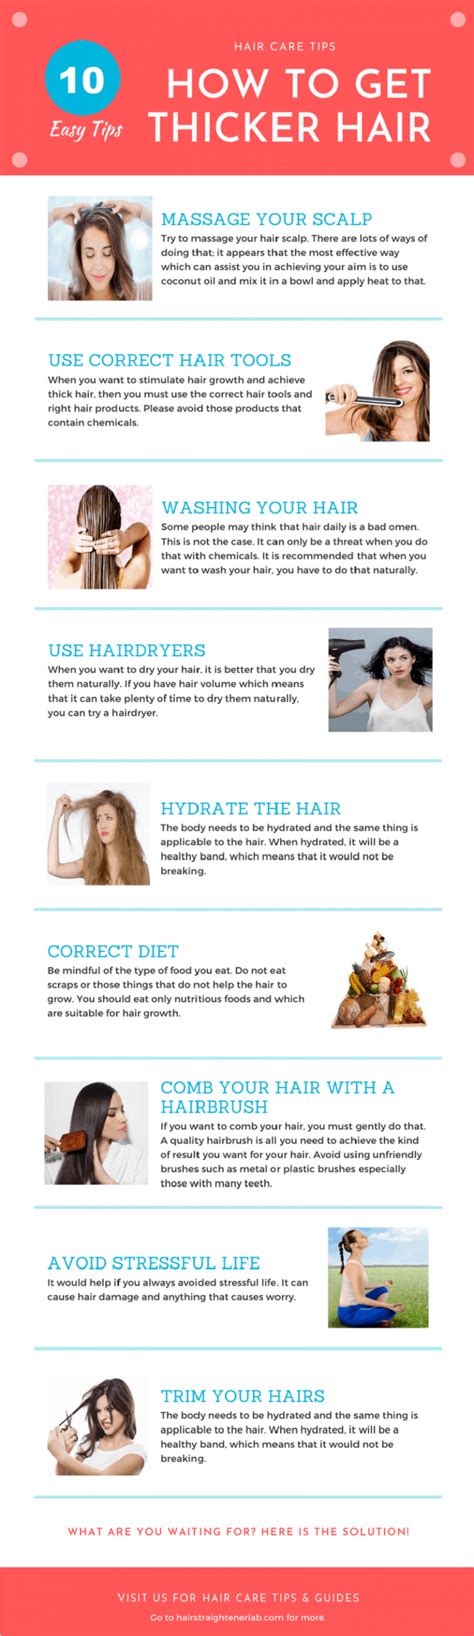 10 Easy Tips On How To Get Thicker Hair